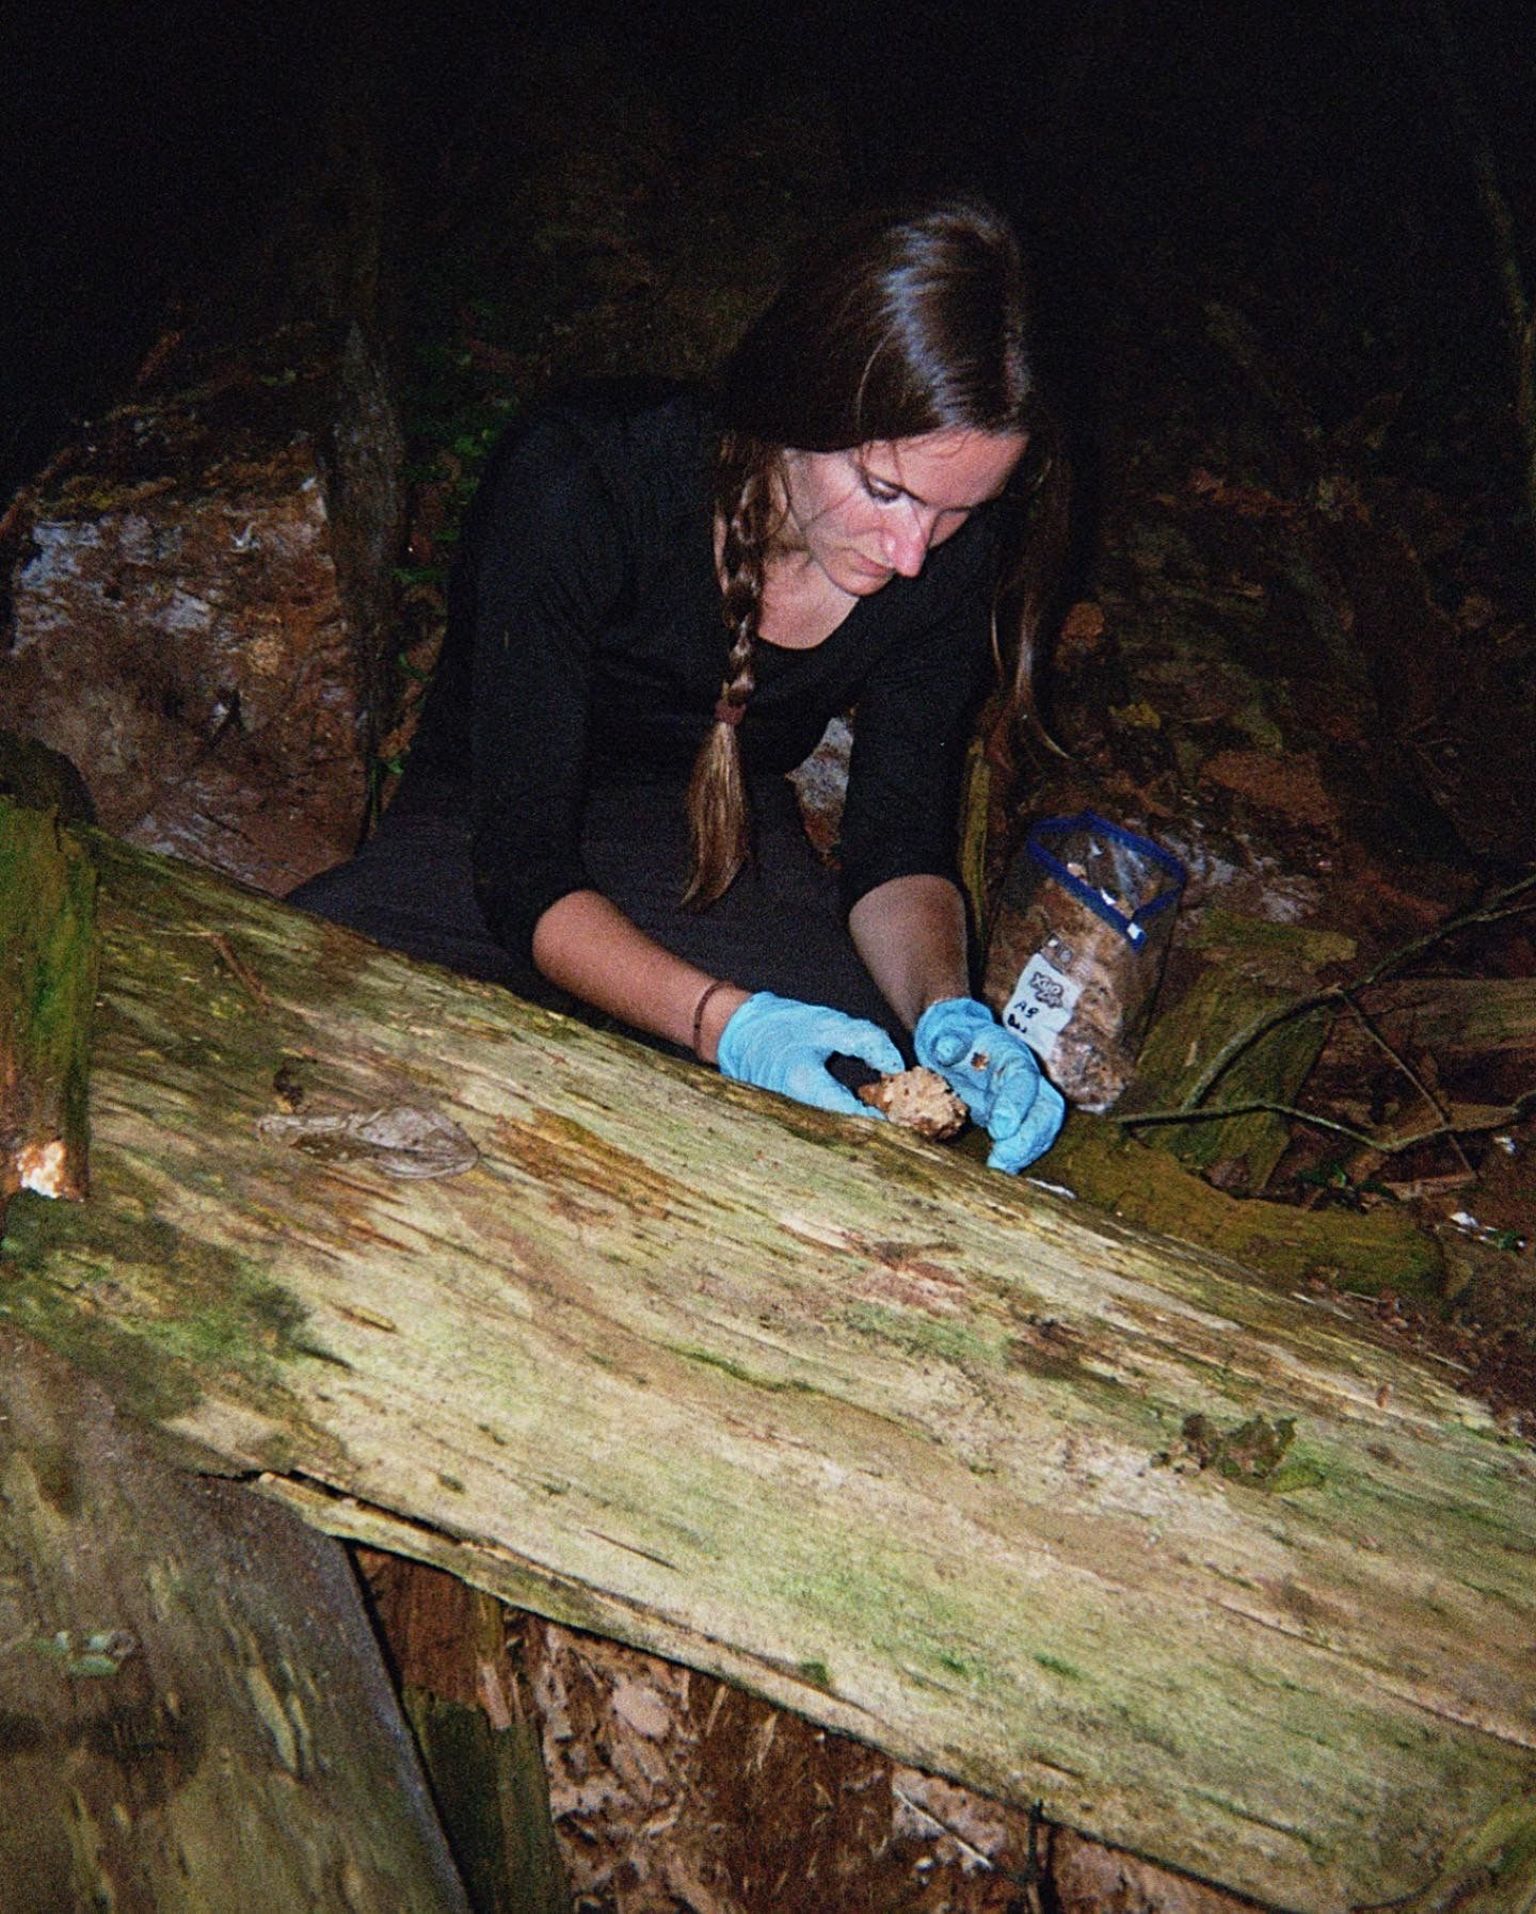 A scientist takes a sample of bark from a tree in Budongo Central Forest Reserve, Uganda